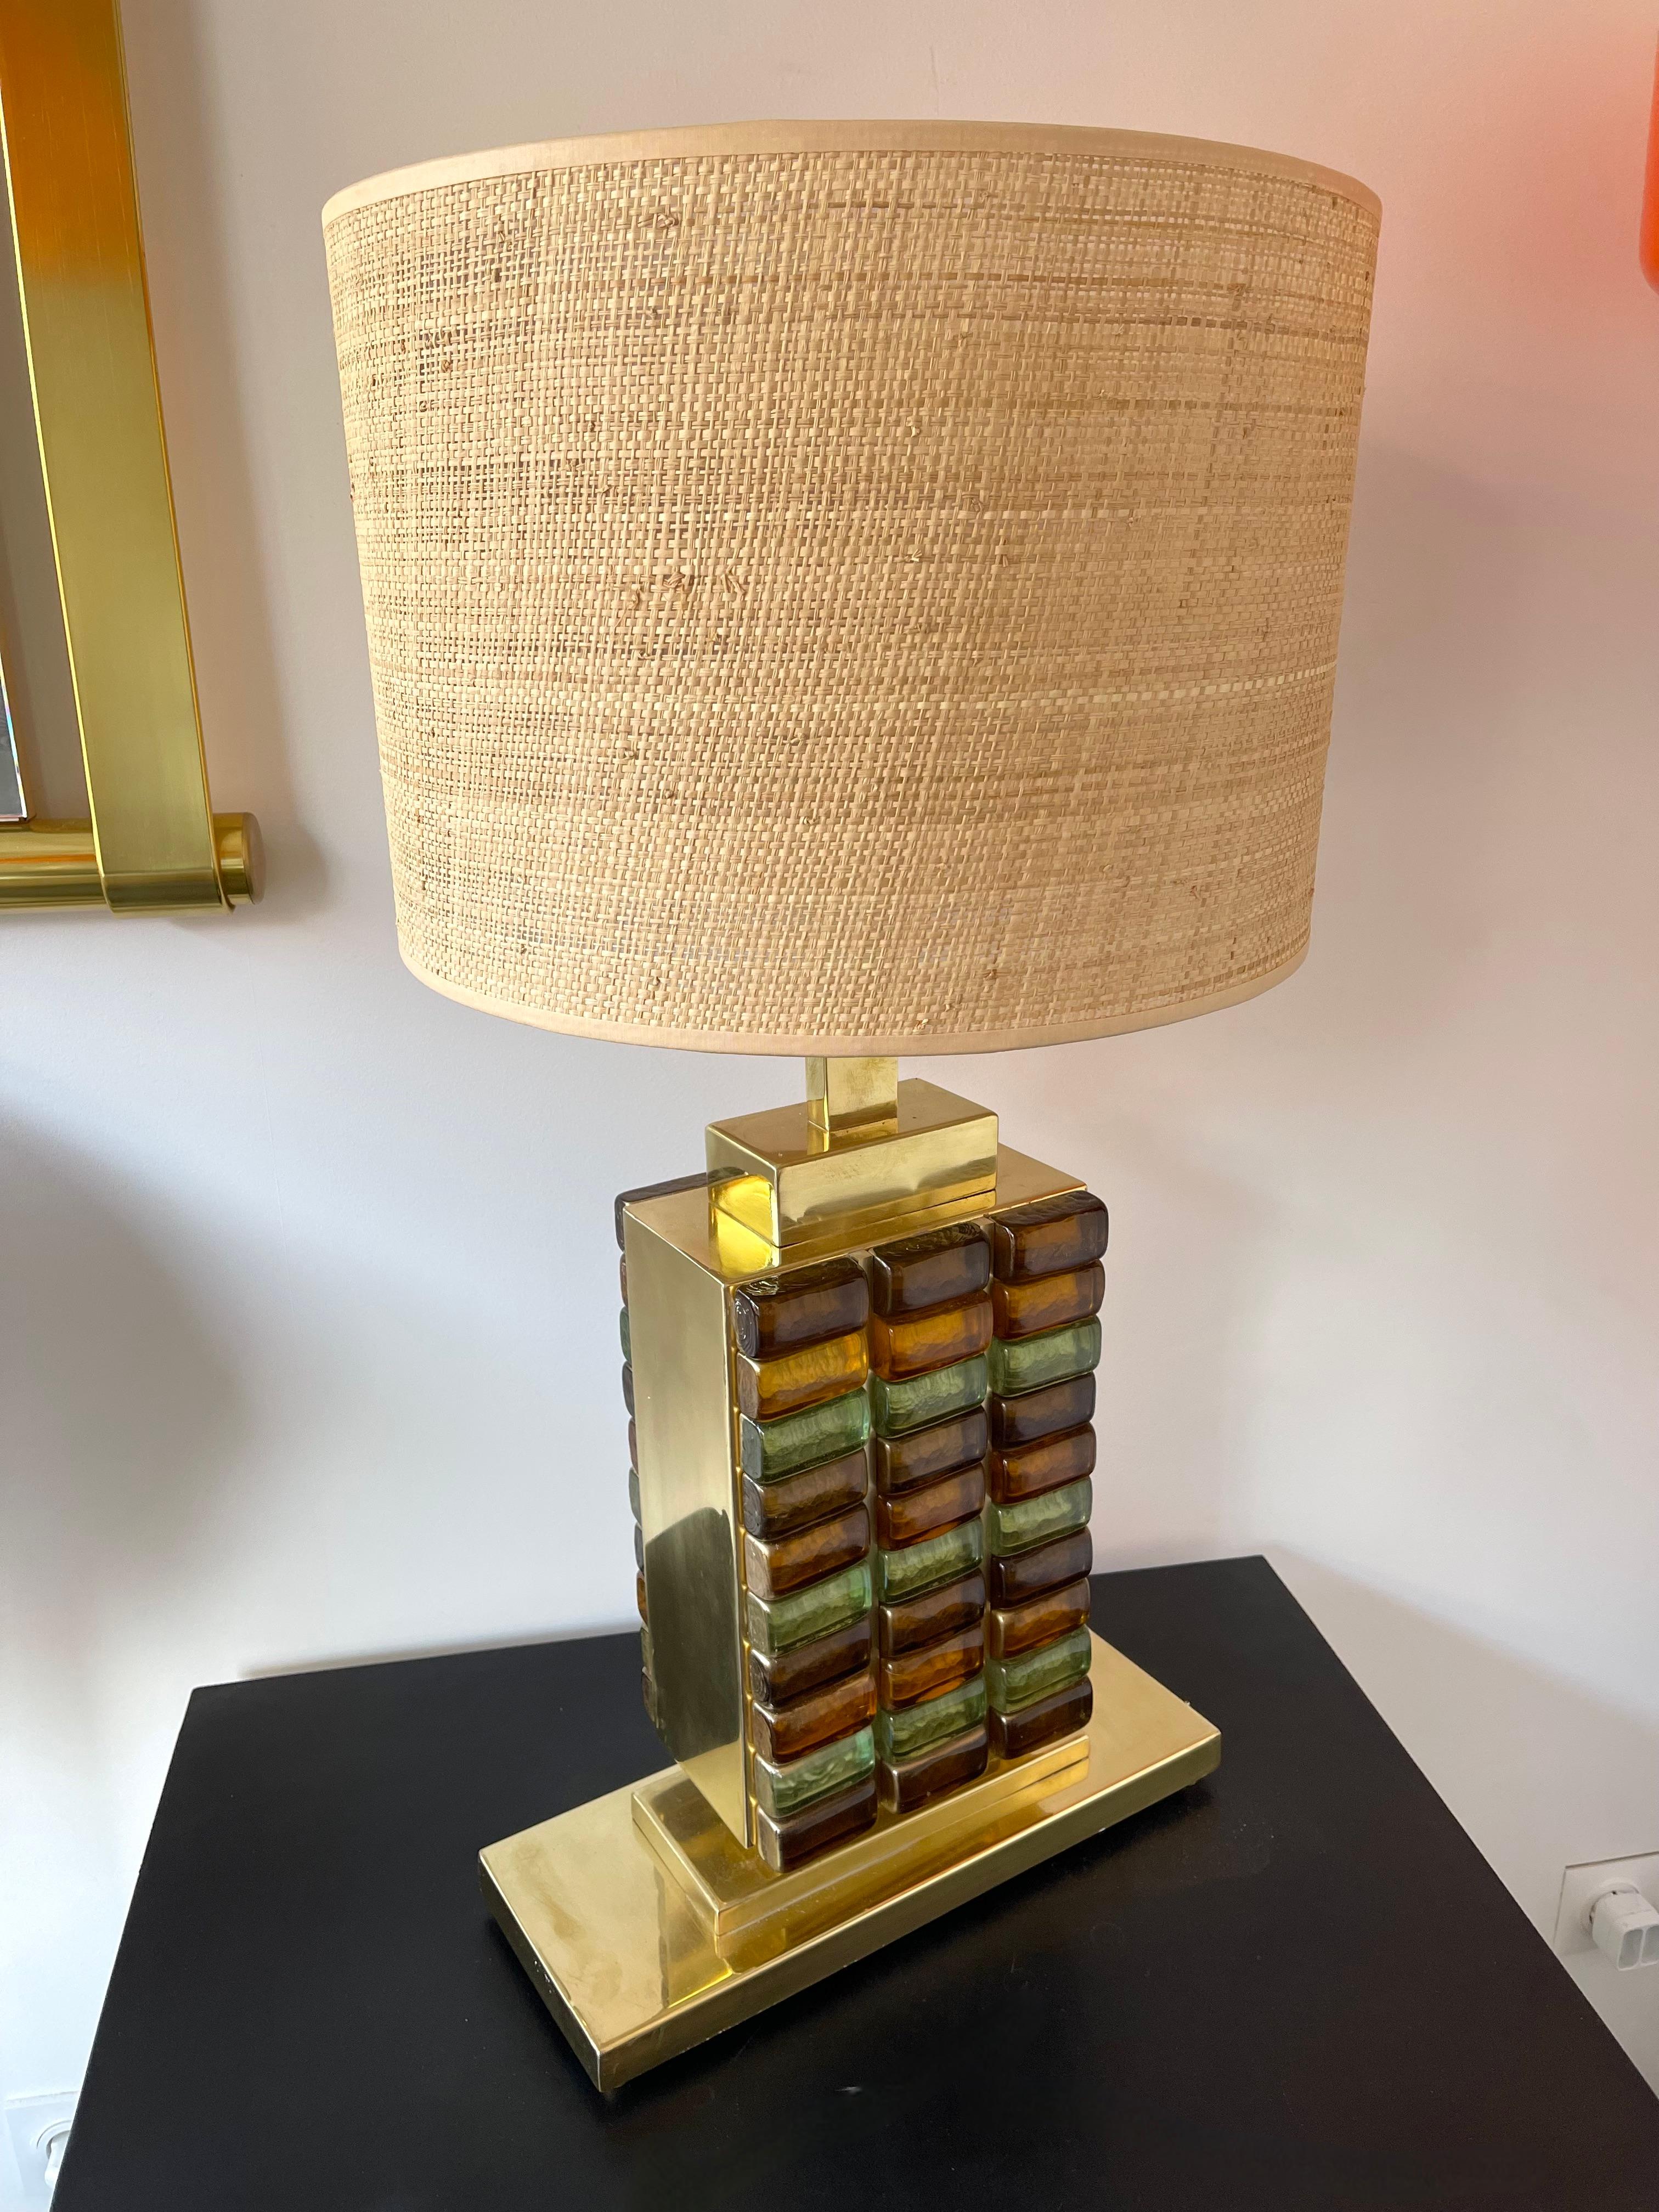 Pair of Murano glass cabochon and brass table or bedside lamps. Contemporary work from a small artisanal italian design workshop. In the mood of Mid-Century Modern, Hollywood Regency, Venini, Mazzega, La Murrina, Veronese, Barovier, Fratelli Toso,